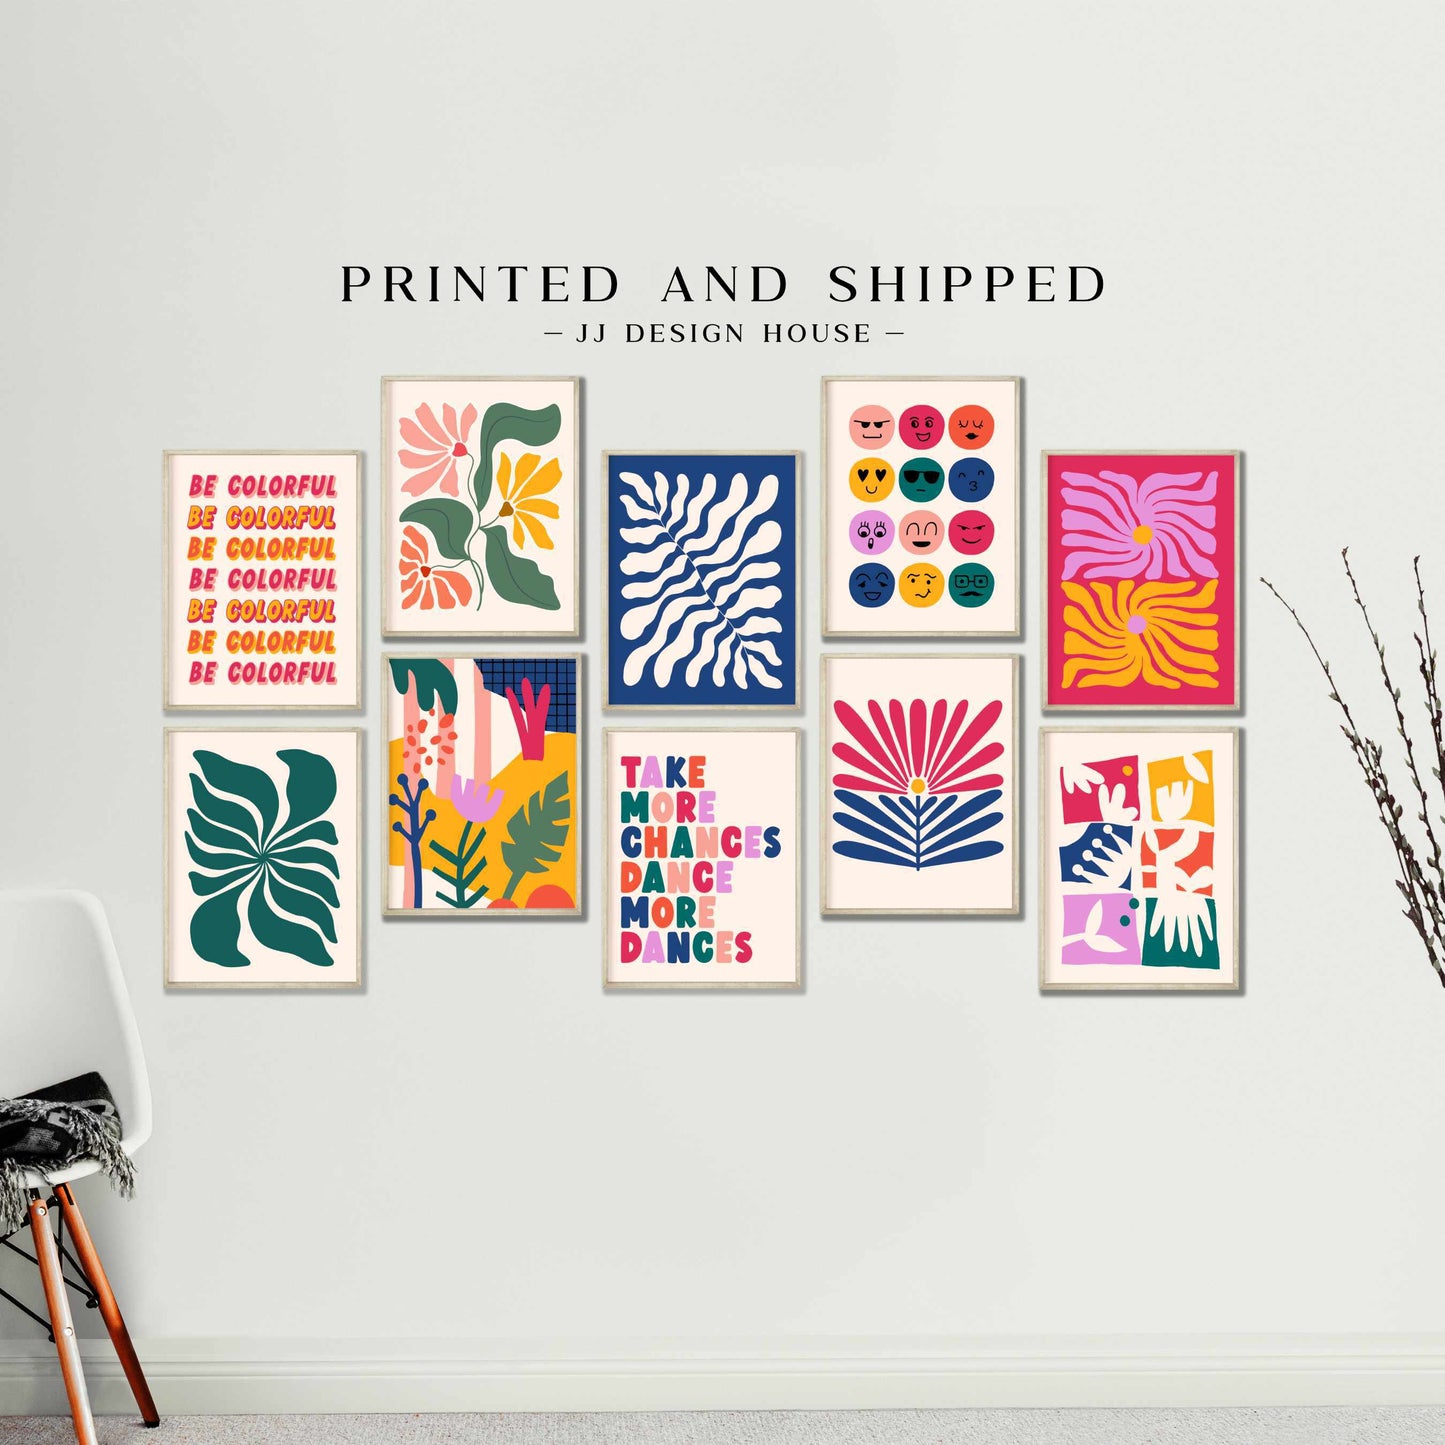 Printed Art Eclectic Gallery Wall Colorful Prints Set of 10